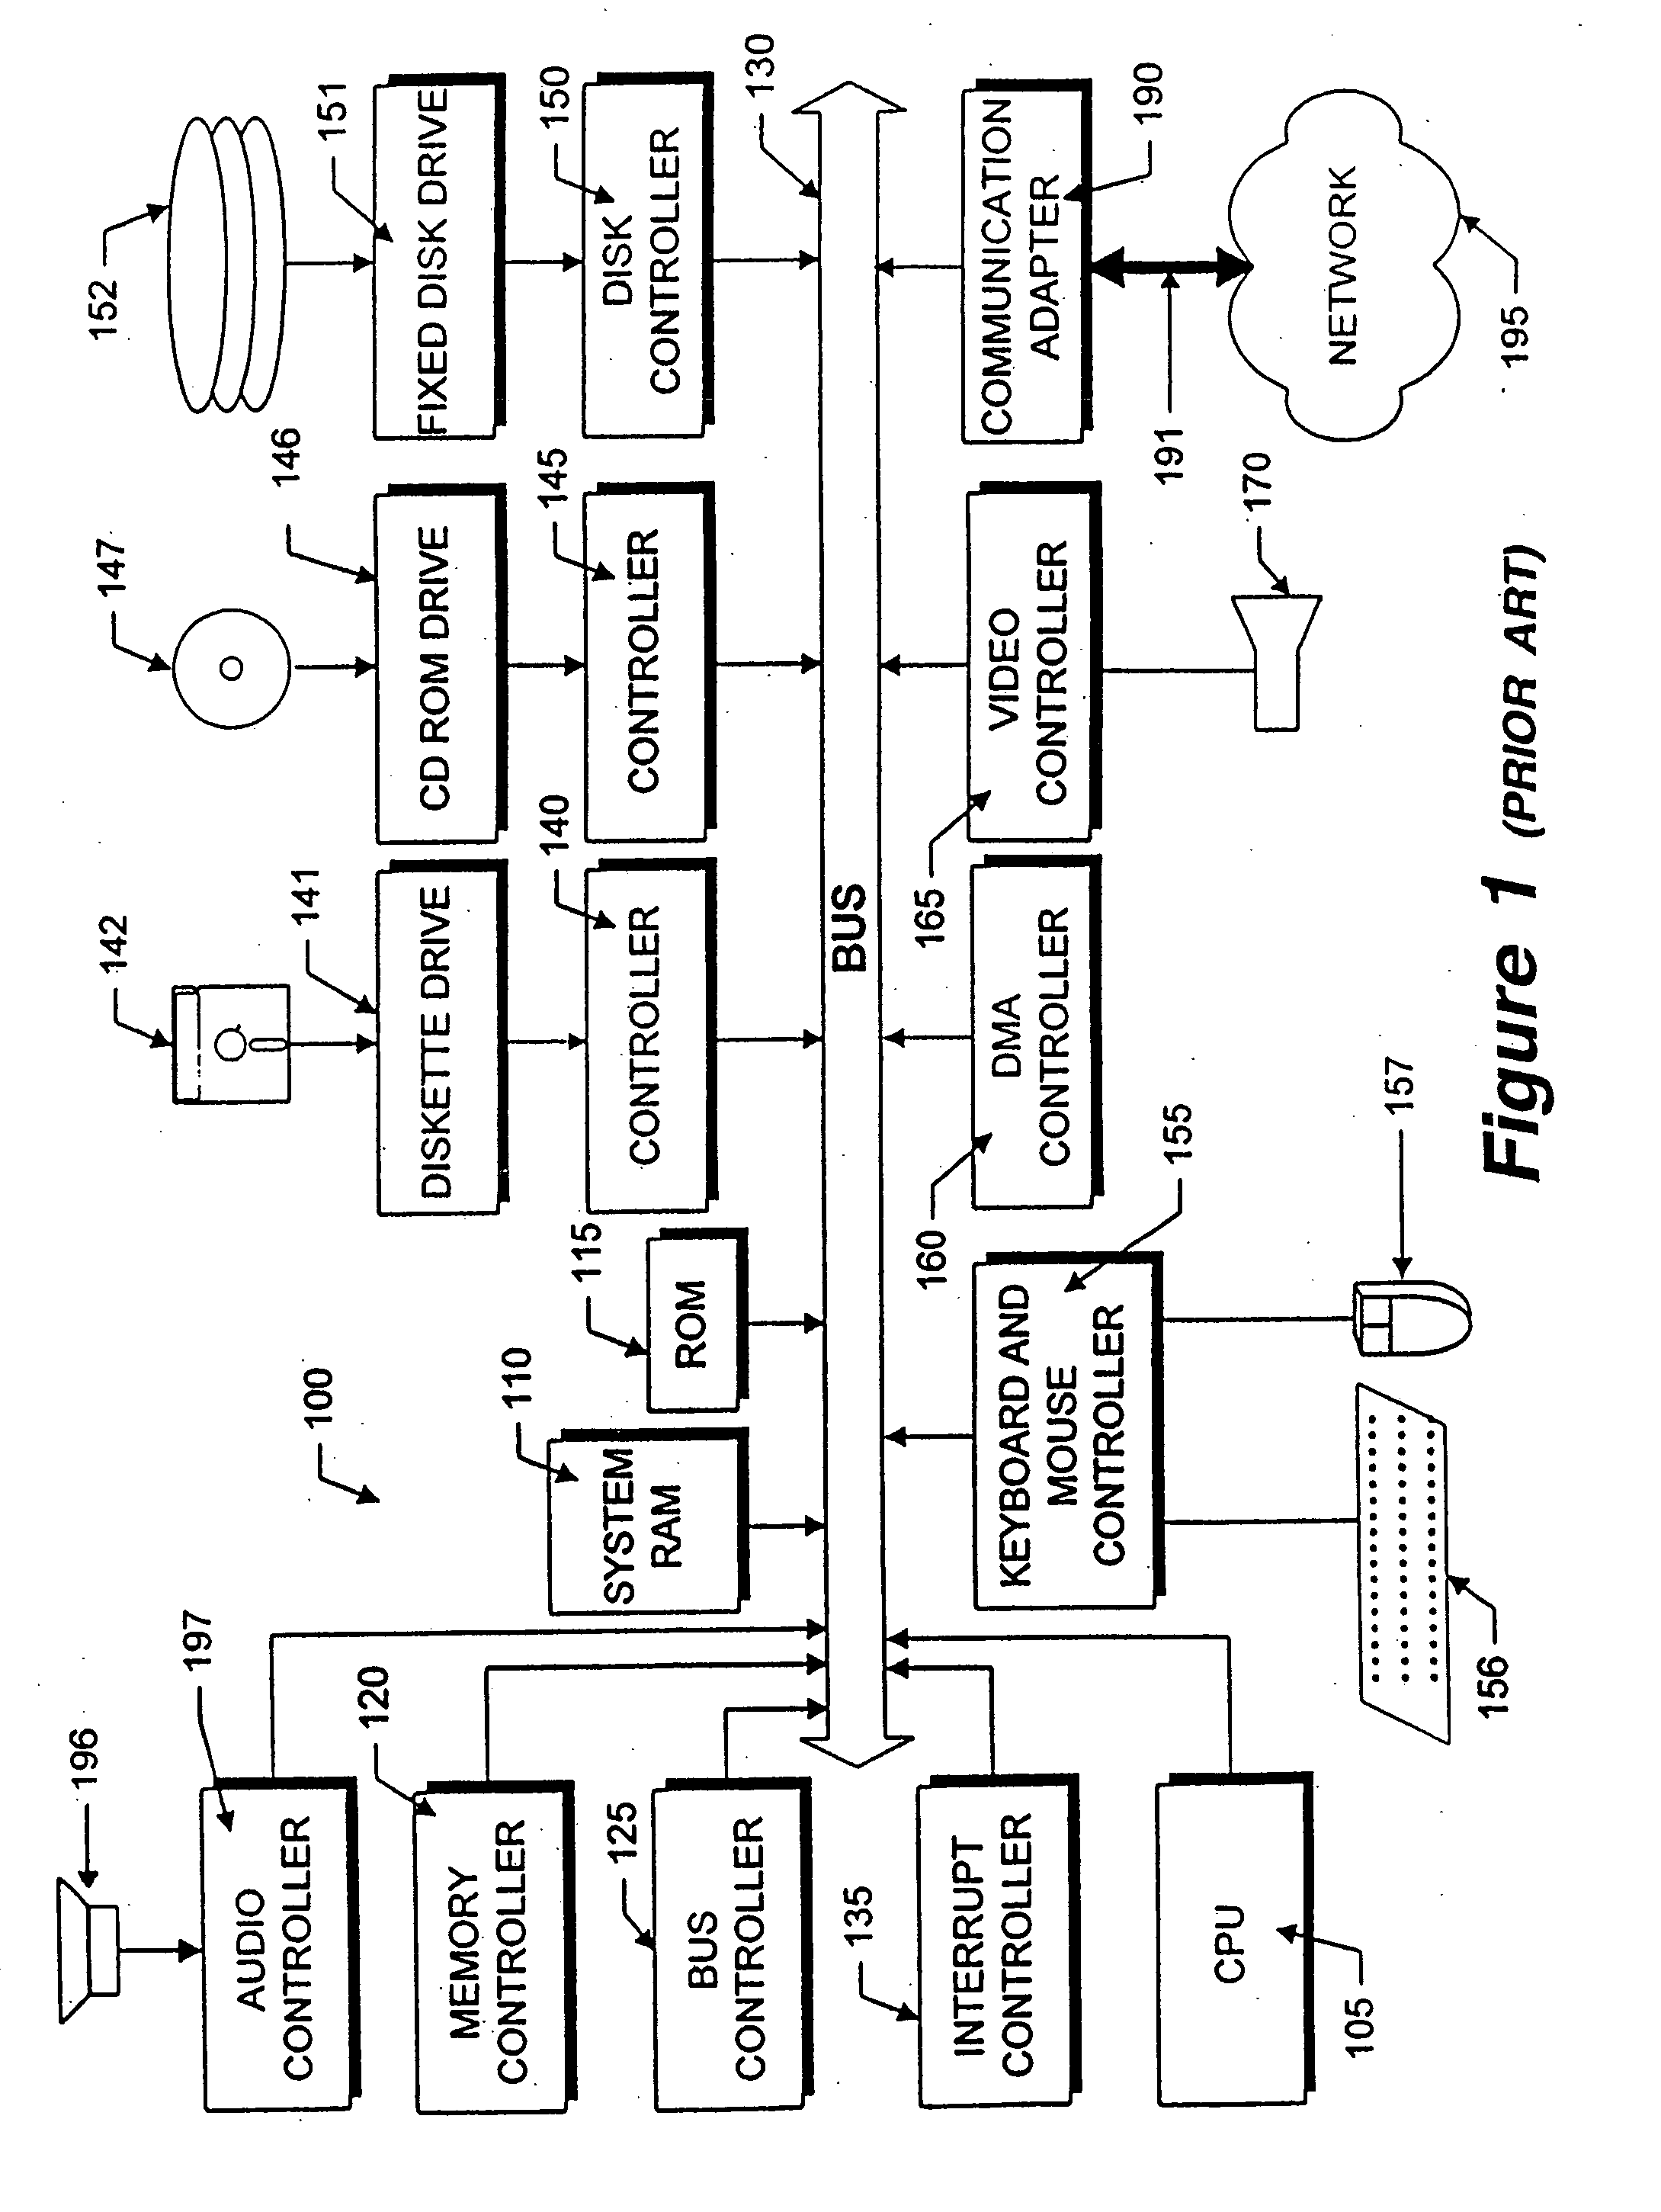 Method and apparatus for distribution of greeting cards with electronic commerce transaction